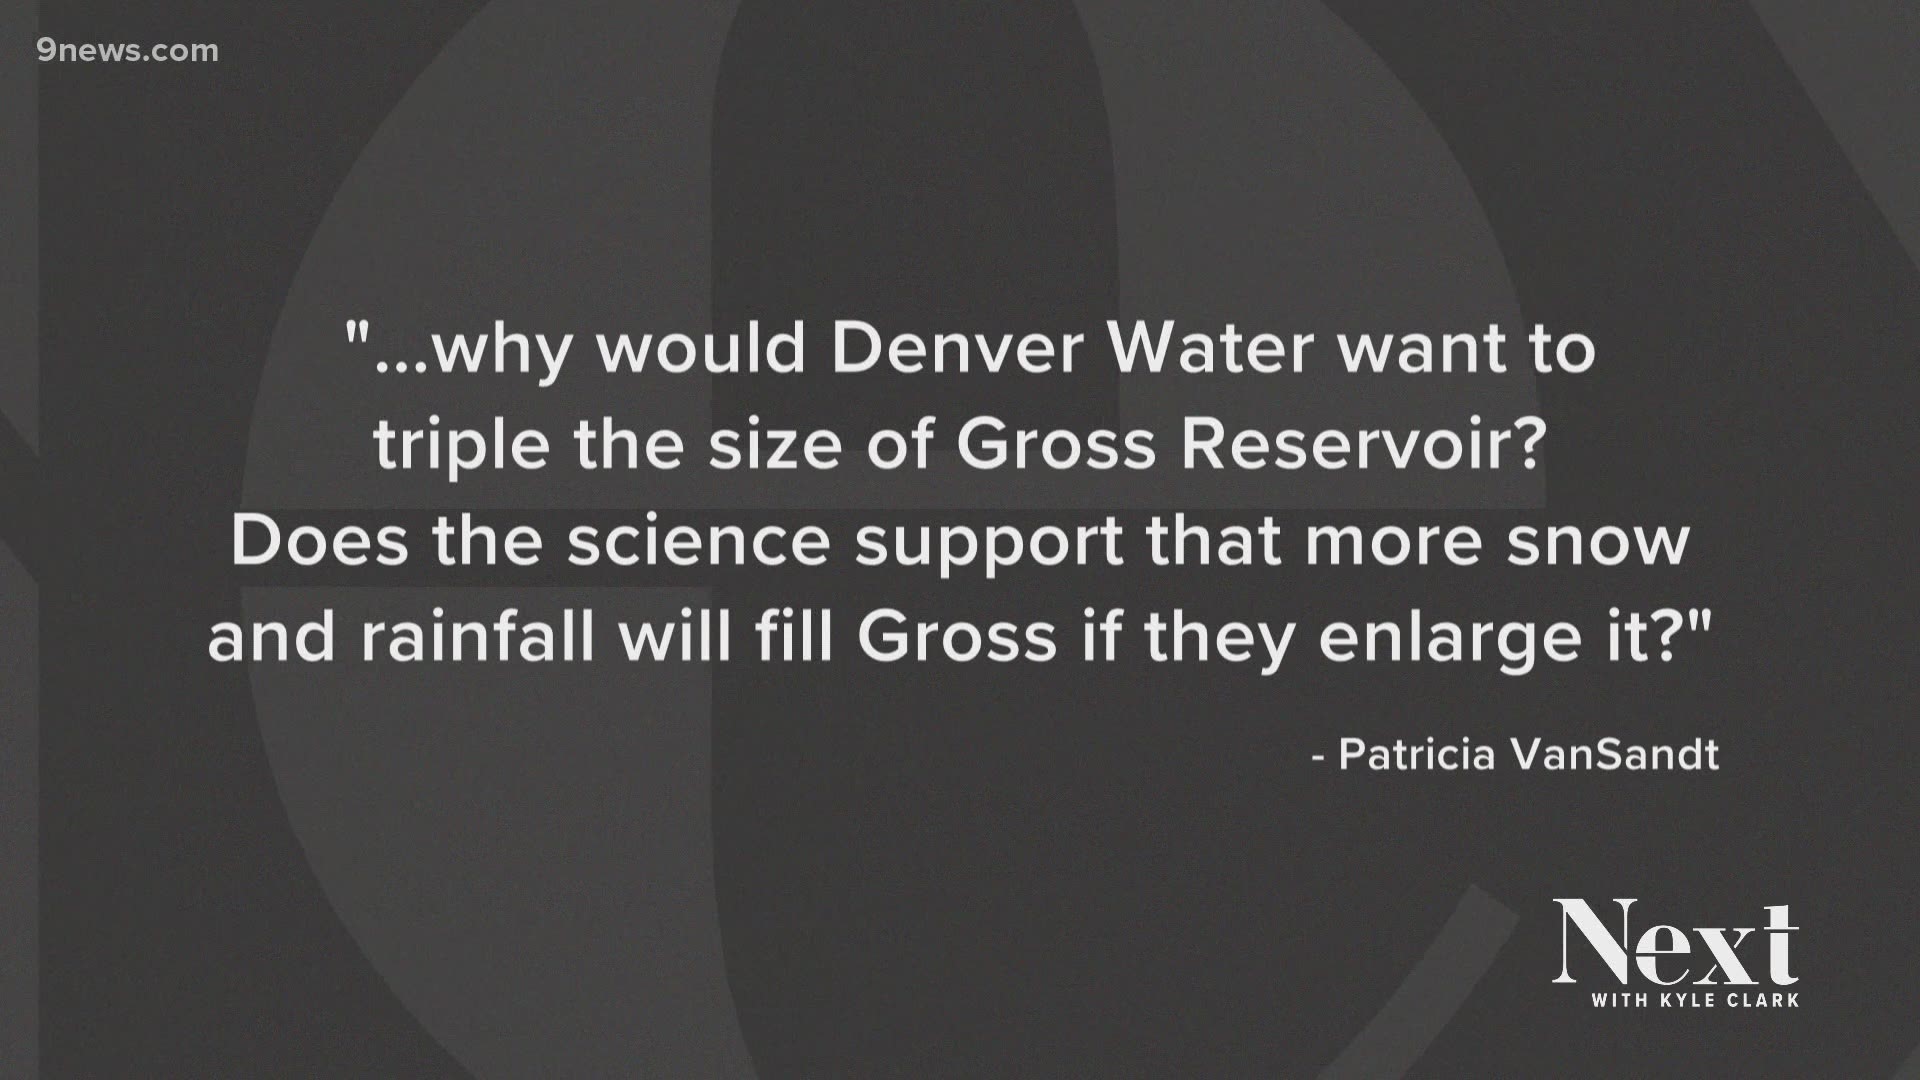 As Denver Water pushes to expand Gross Reservoir, Patricia asked if there is enough snowmelt and rainfall to support that idea.